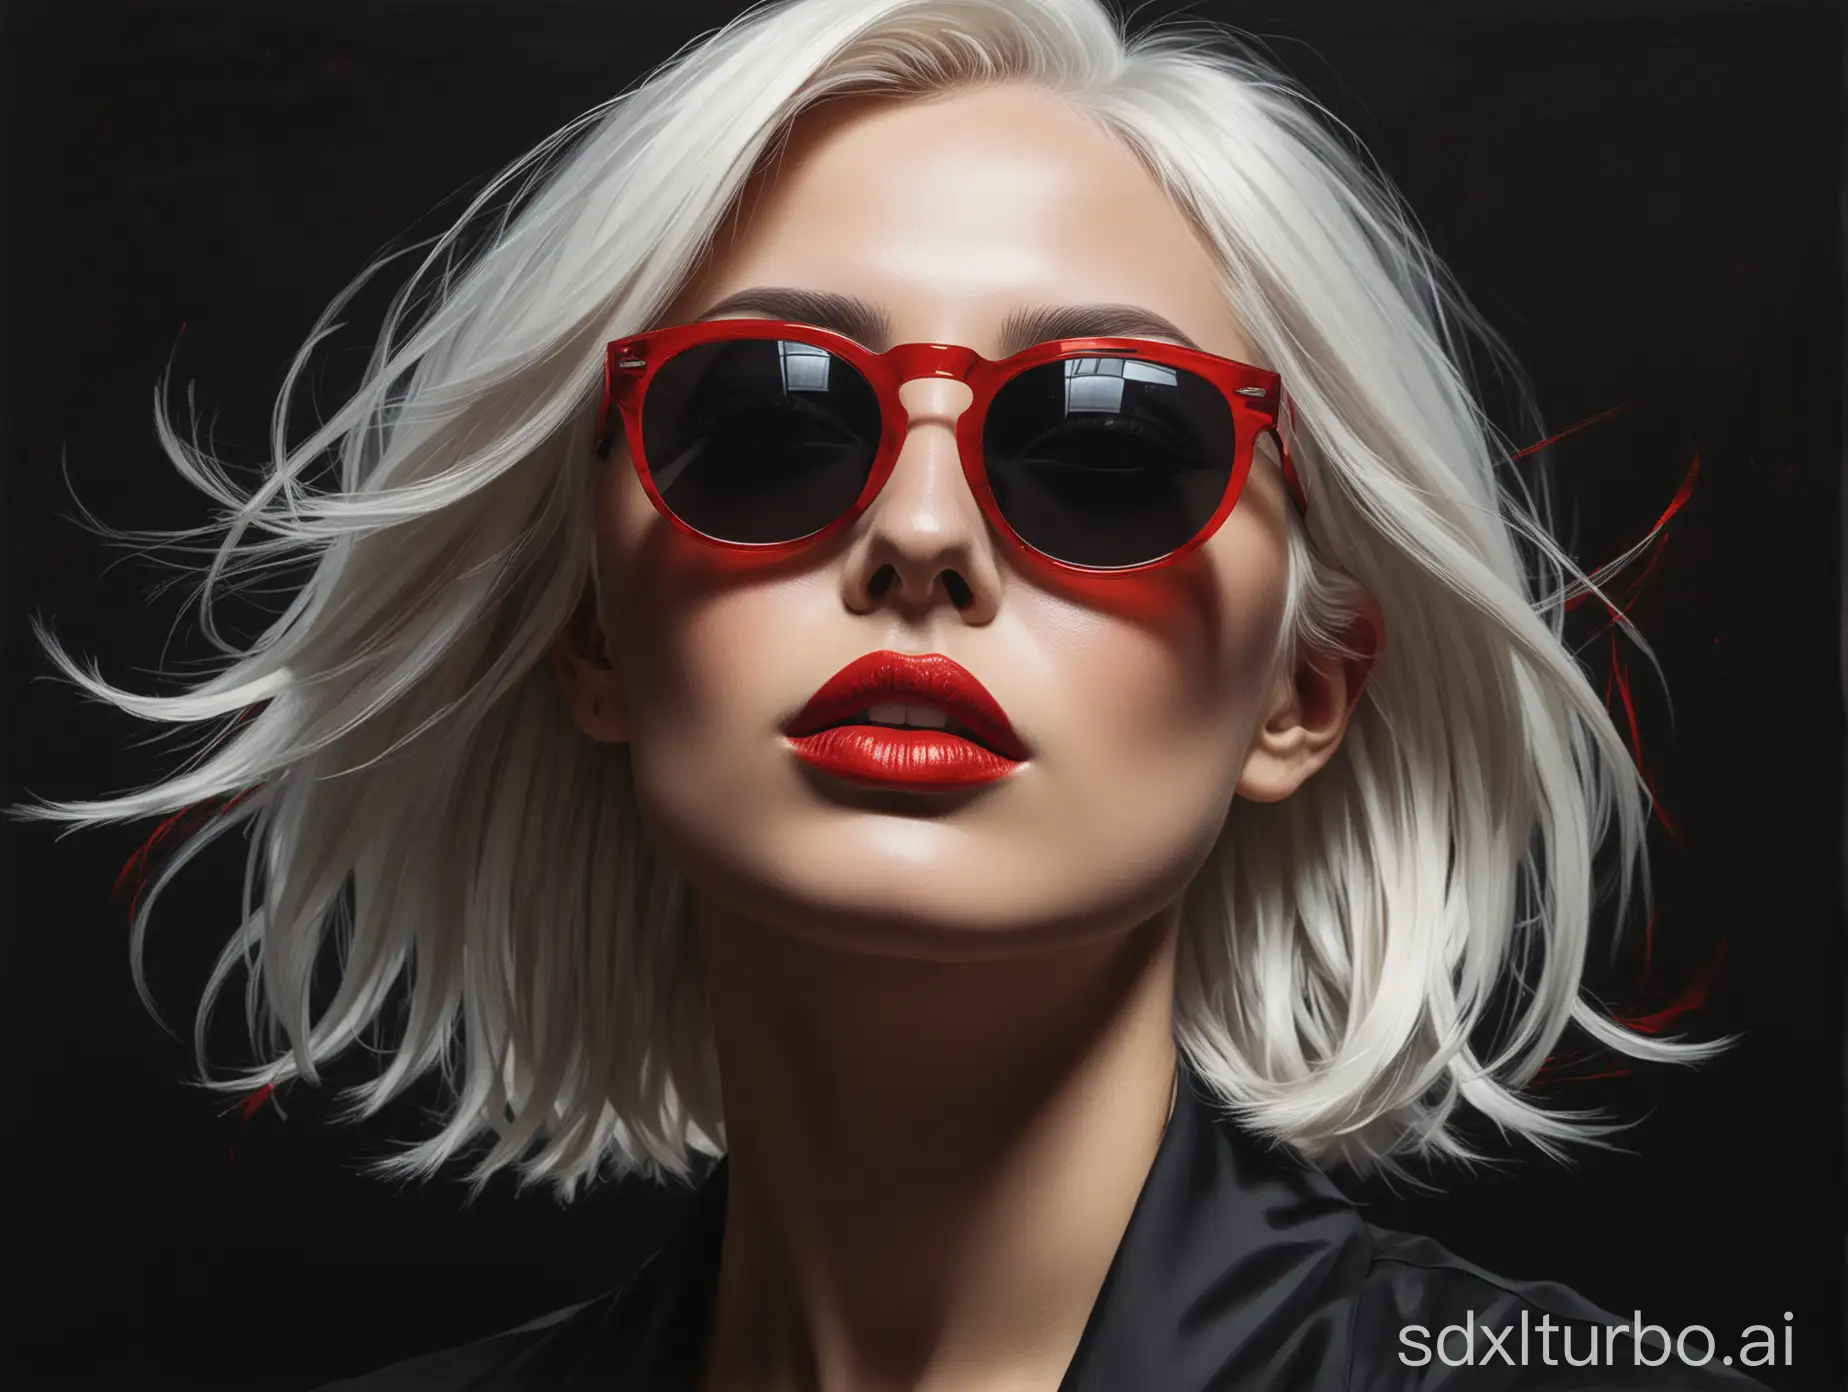 A stylized portrait of a woman. She has striking white hair that flows behind her, contrasting sharply with the dark background. She wears black sunglasses, which cast a shadow over her eyes, and her lips are painted a vivid red. The woman's face is turned slightly upwards, emphasizing the contours of her cheekbones and nose. The overall color palette is dominated by blacks, whites, and reds, creating a dramatic and intense visual effect.
